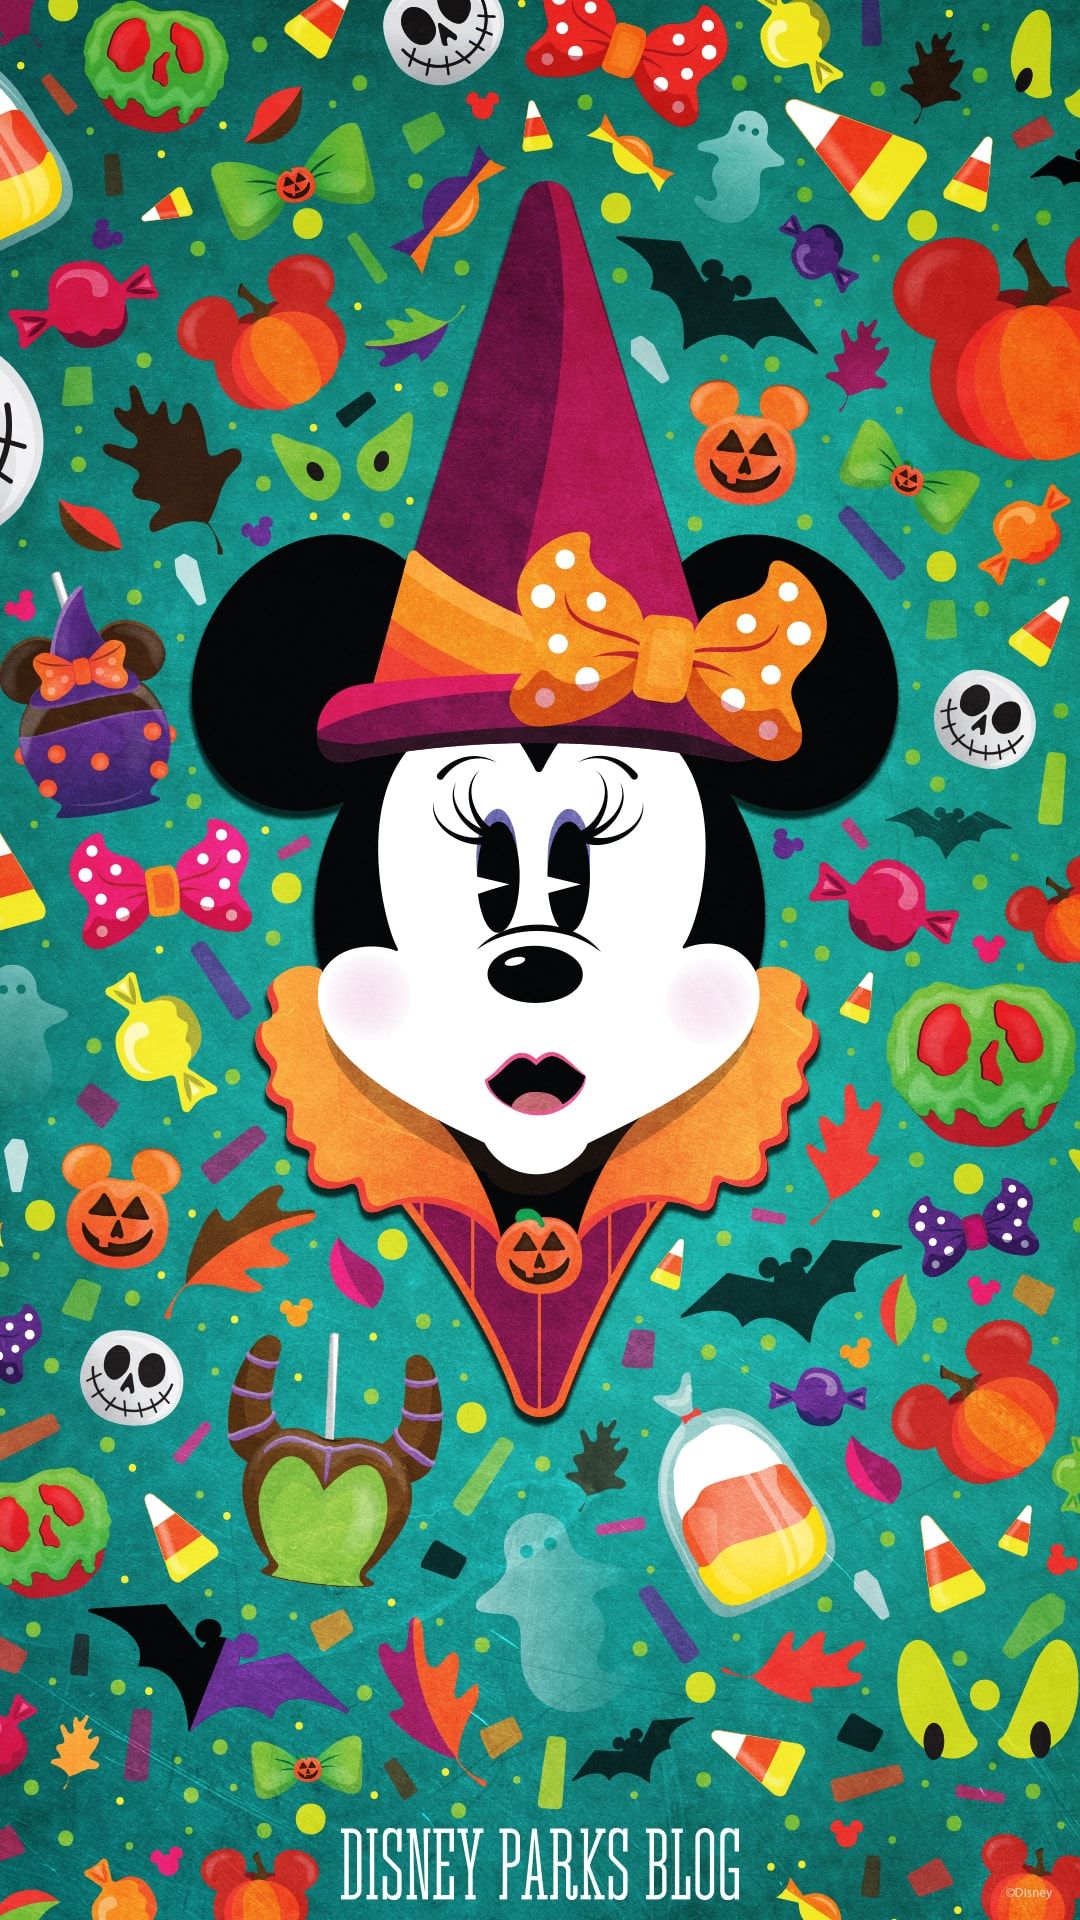 Halloween wallpaper featuring Minnie Mouse in a witch's hat - Minnie Mouse